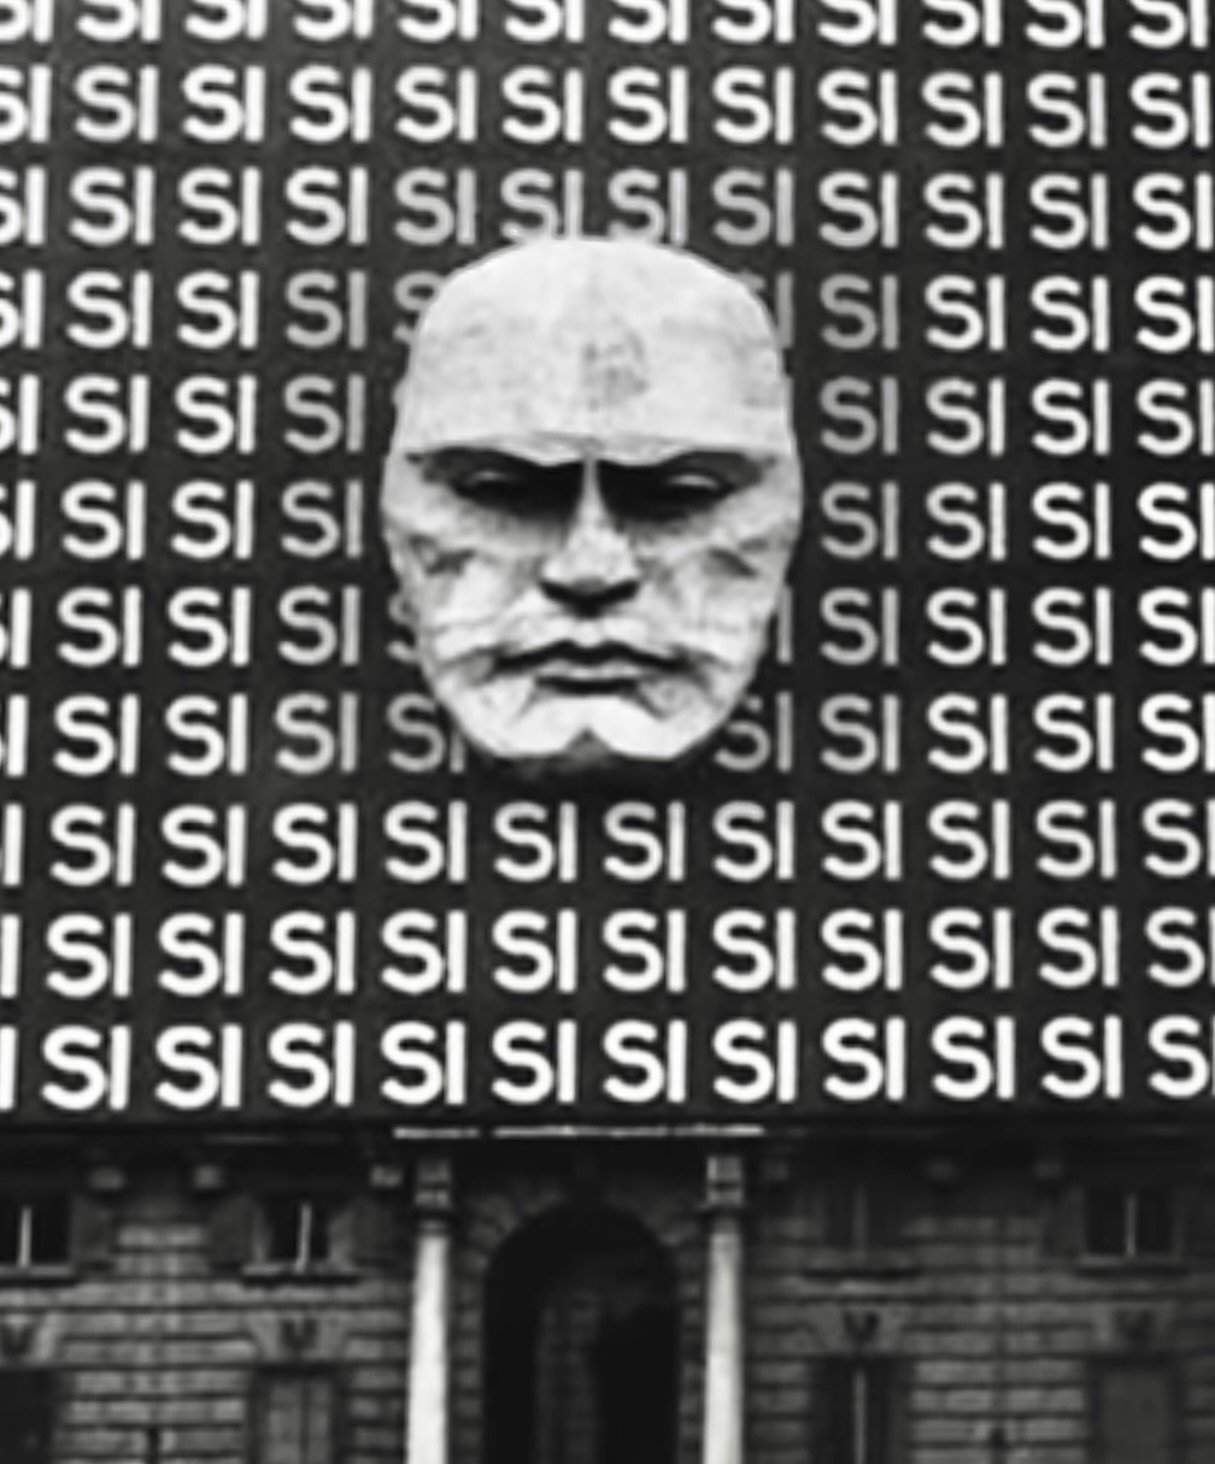 This was the exterior fa&ccedil;ade to the voting booths (or rather tables) for Italians who were to decide whether to vote for a Fascist government by selecting either a Yes (Si) or No ballot. 

The vote was counted and Fascism received  10,000,000 